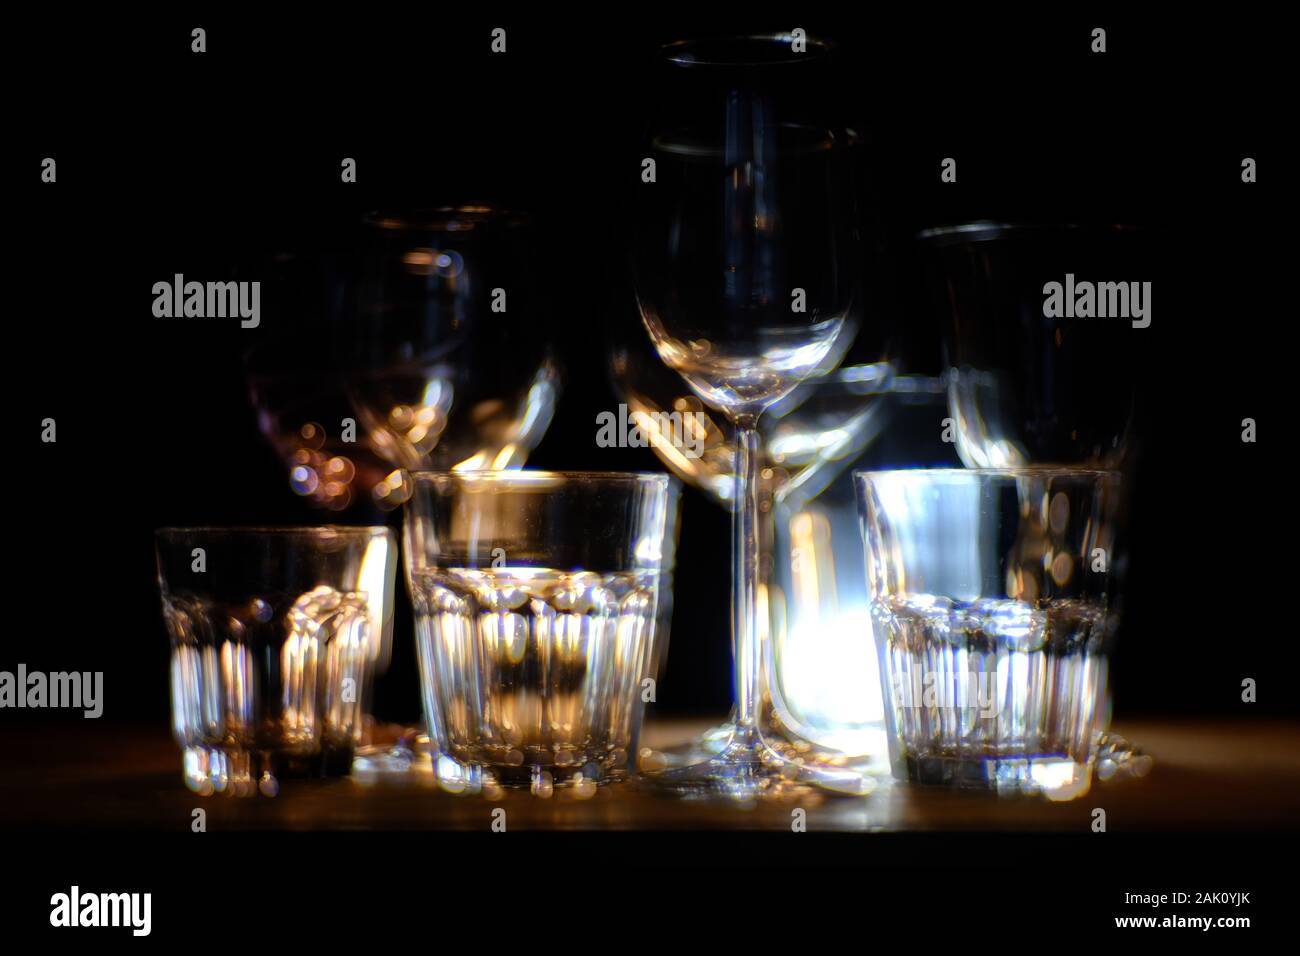 Close ups of wine-, long drink- and spirits-glasses on a wooden shelve in a bar environment, in fron of a dark background, illuminated by colorful spo Stock Photo